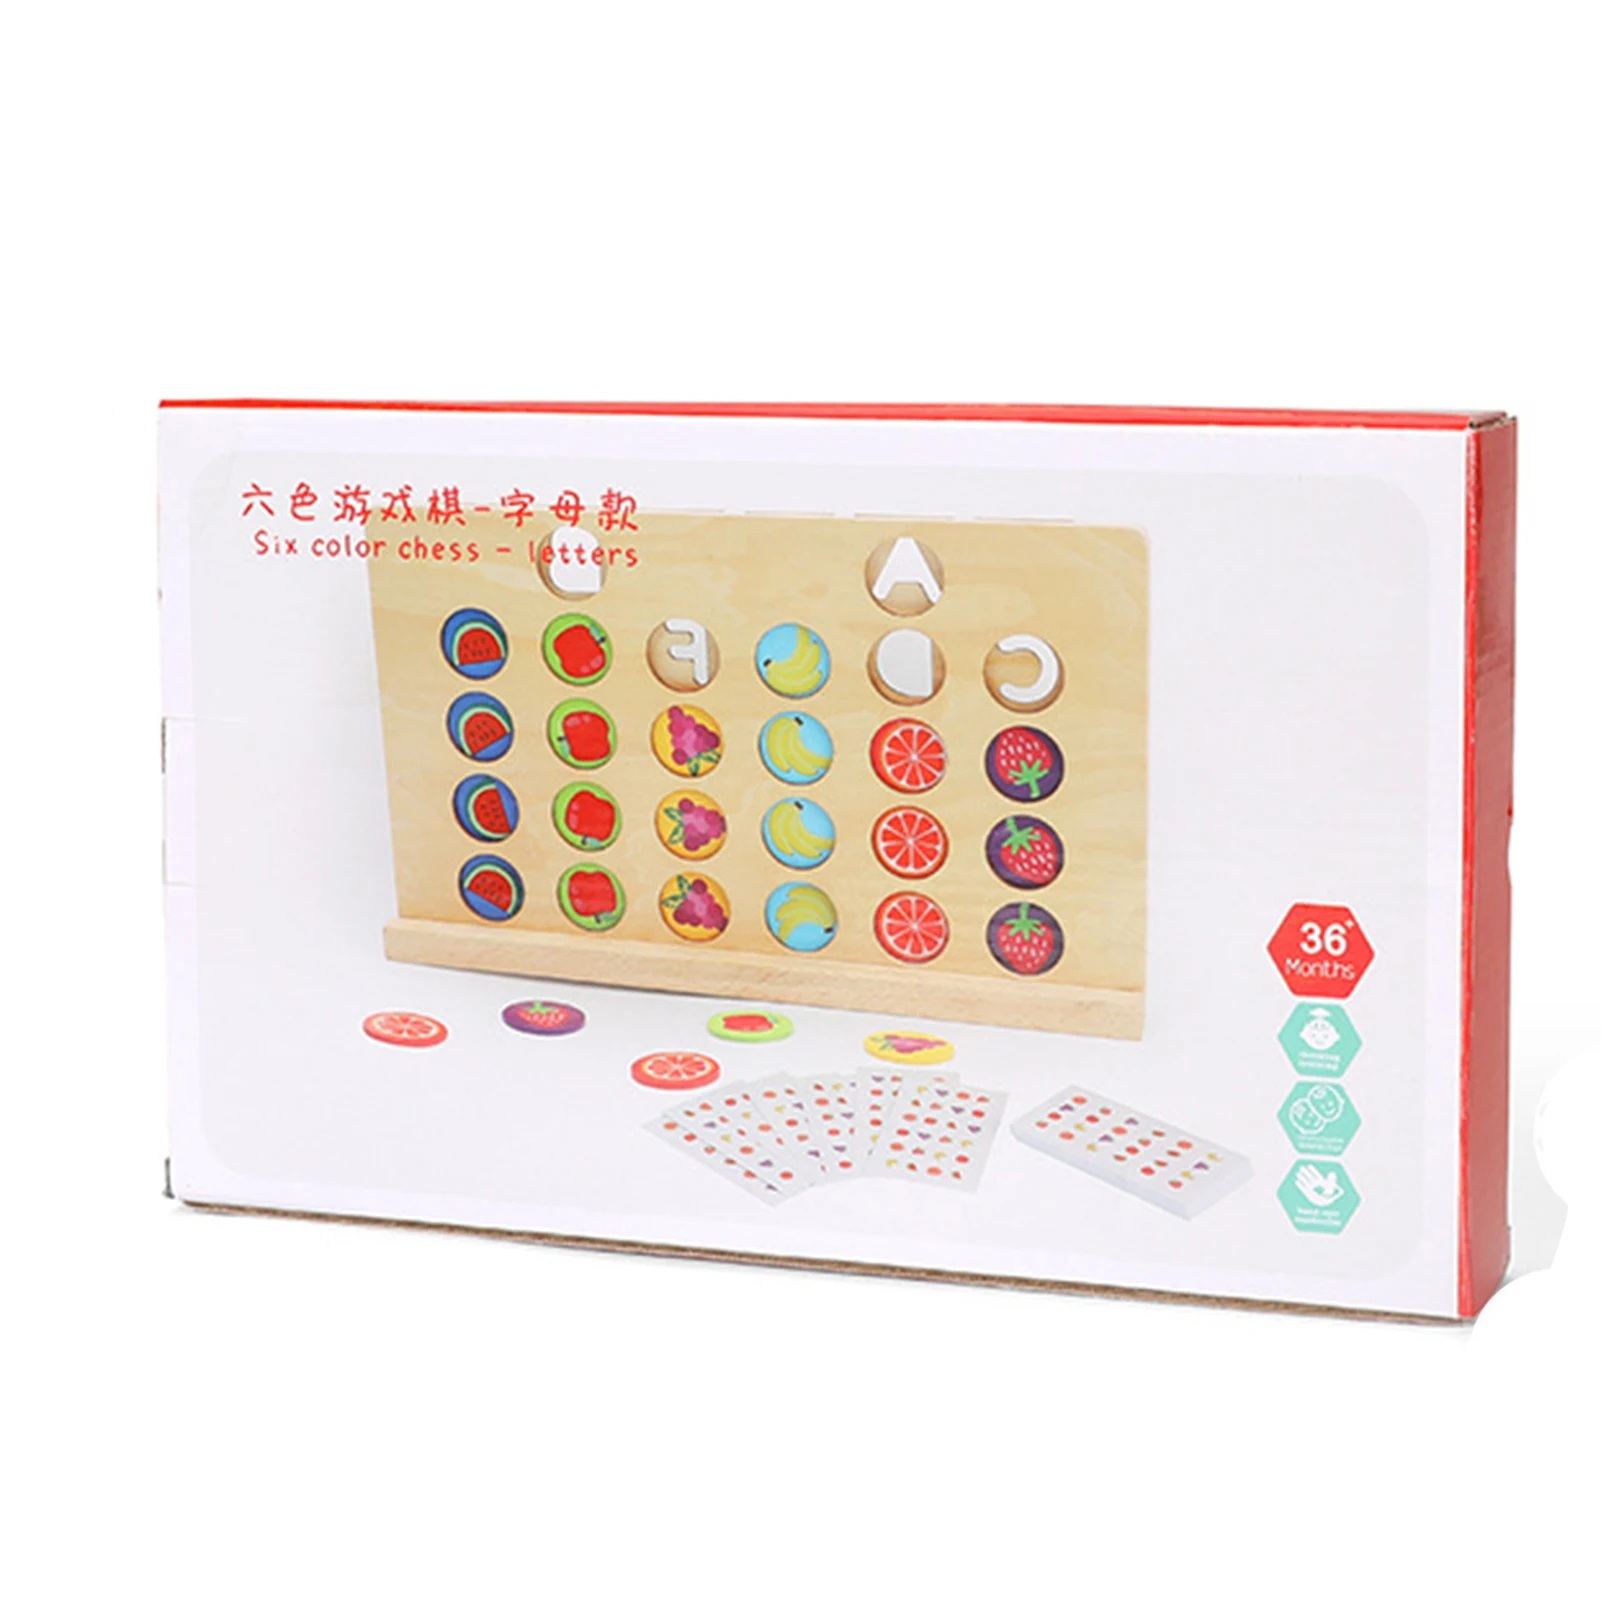 

Children Tabletop Games Toys Improve Logic Training and Thinking Skills for Kids Ability Development